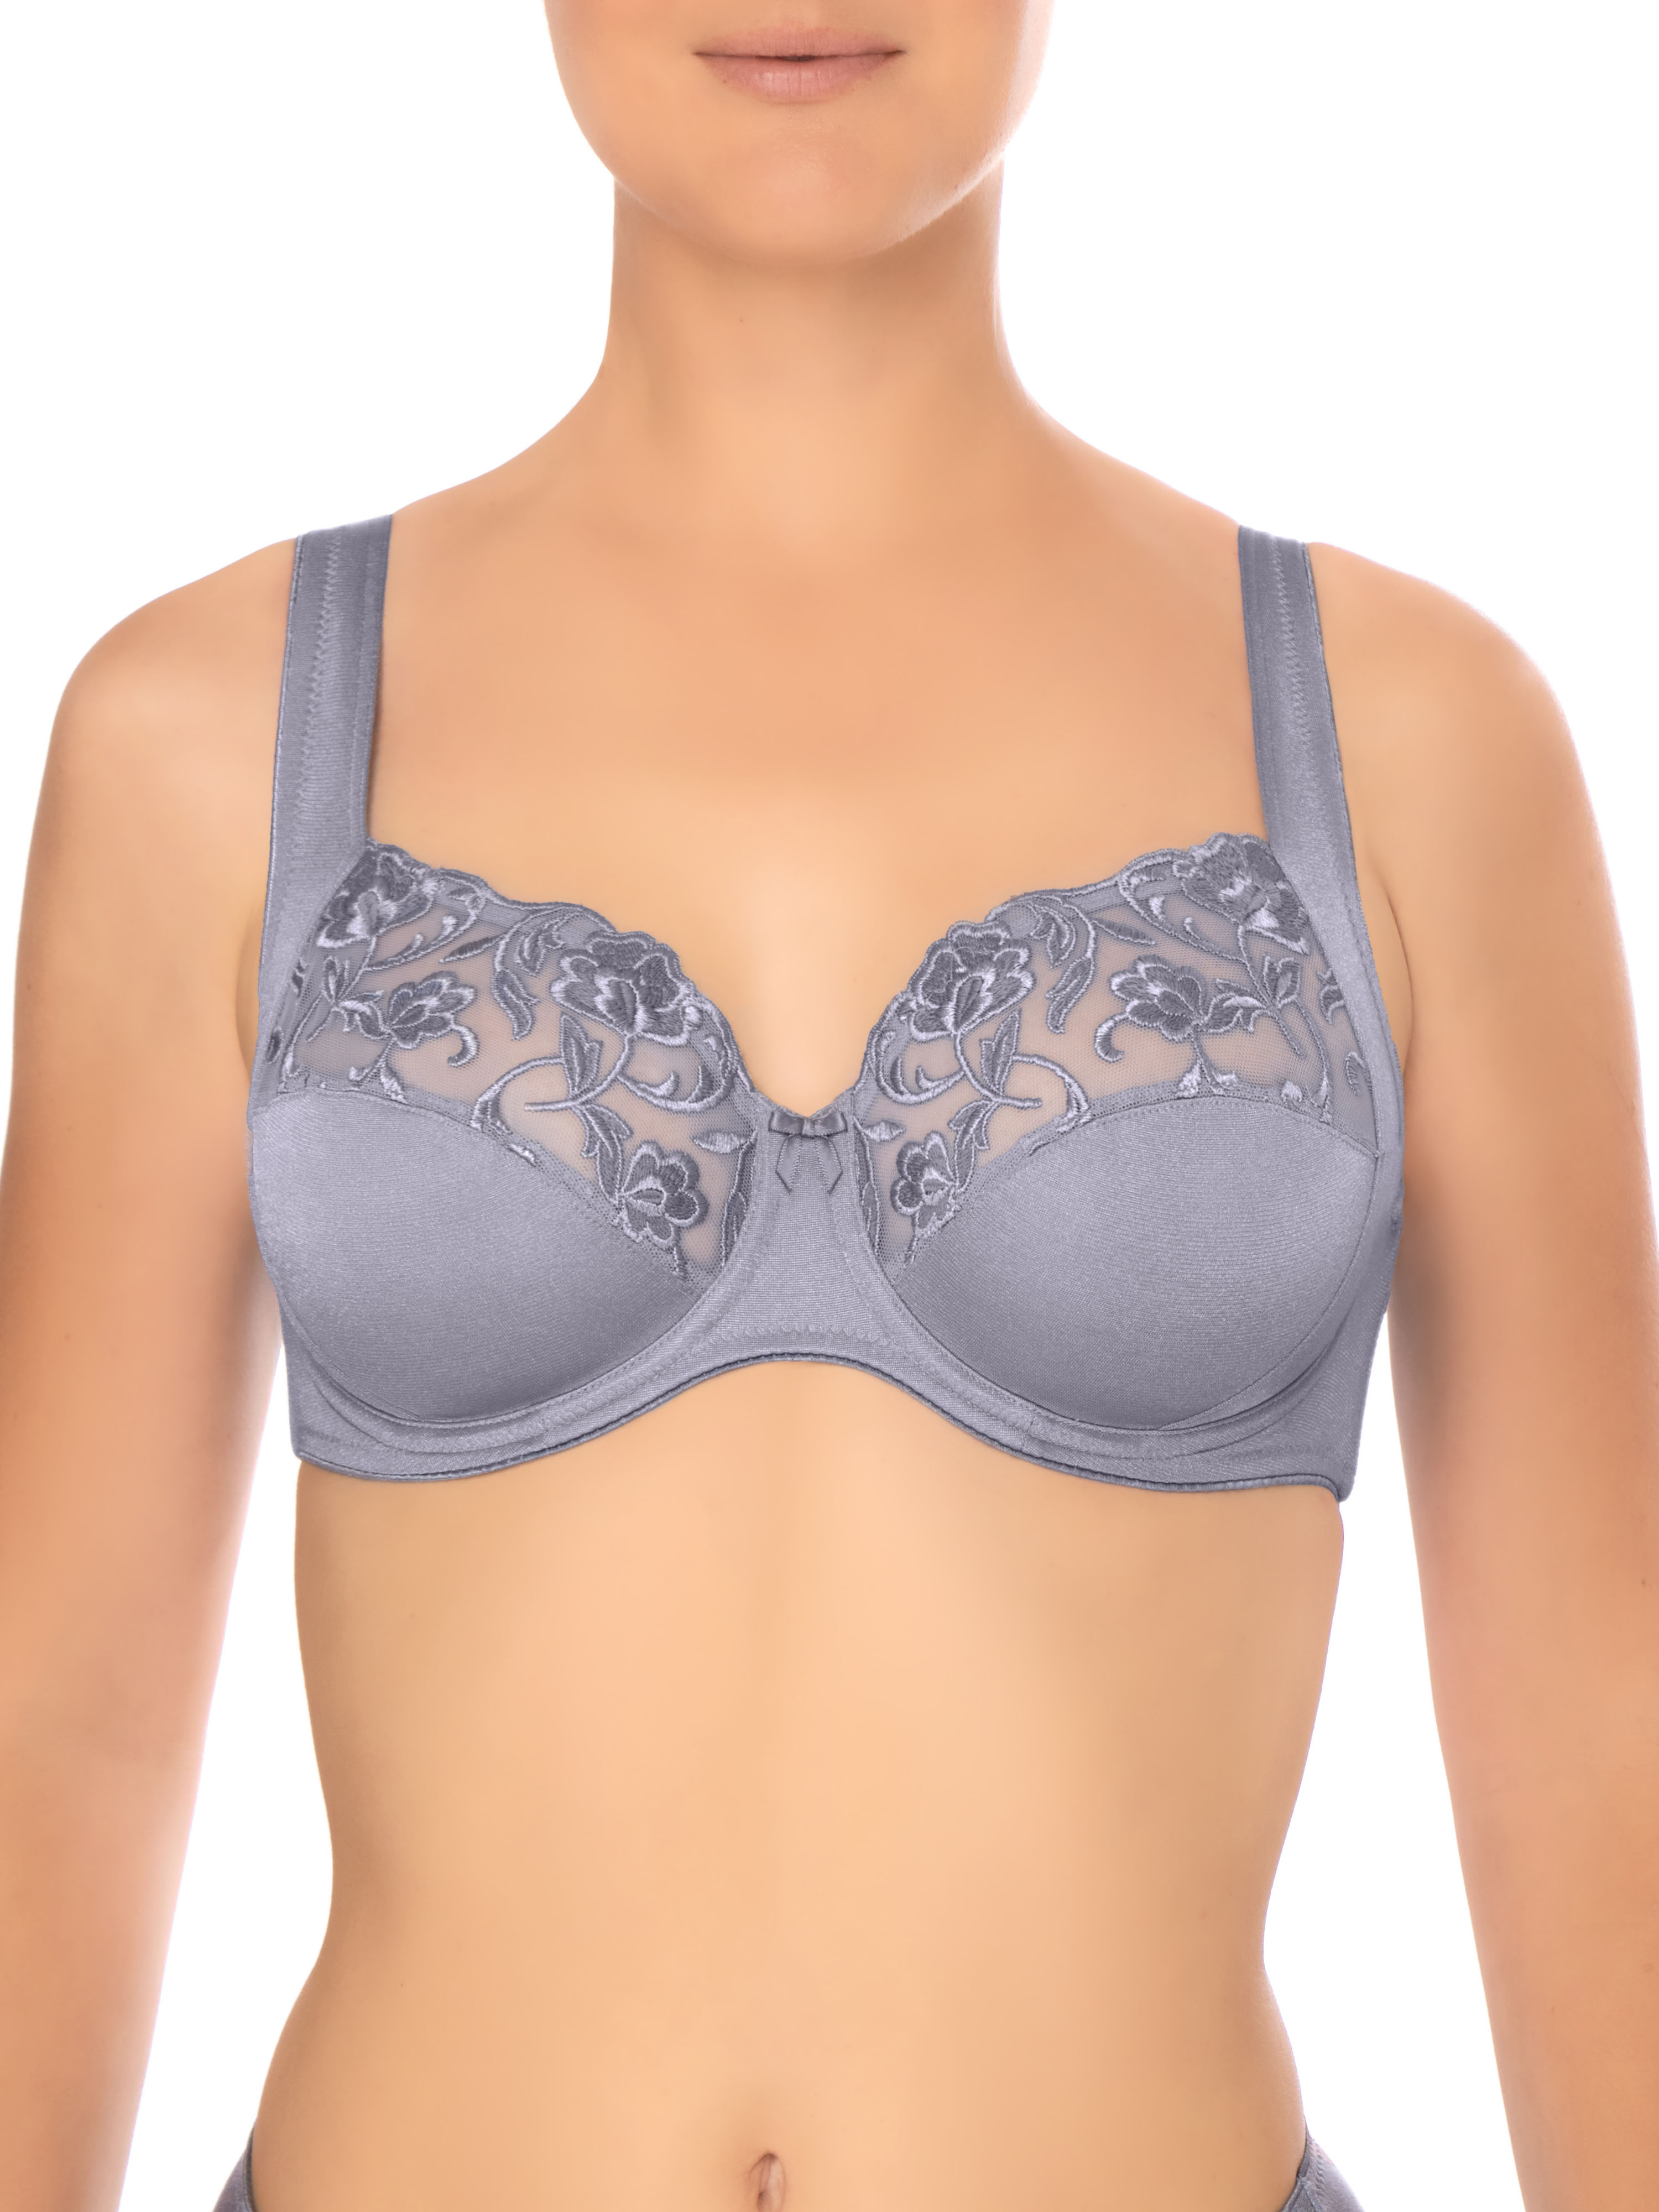 Felina 206289 wired spacer bra VISION DELUXE mauve